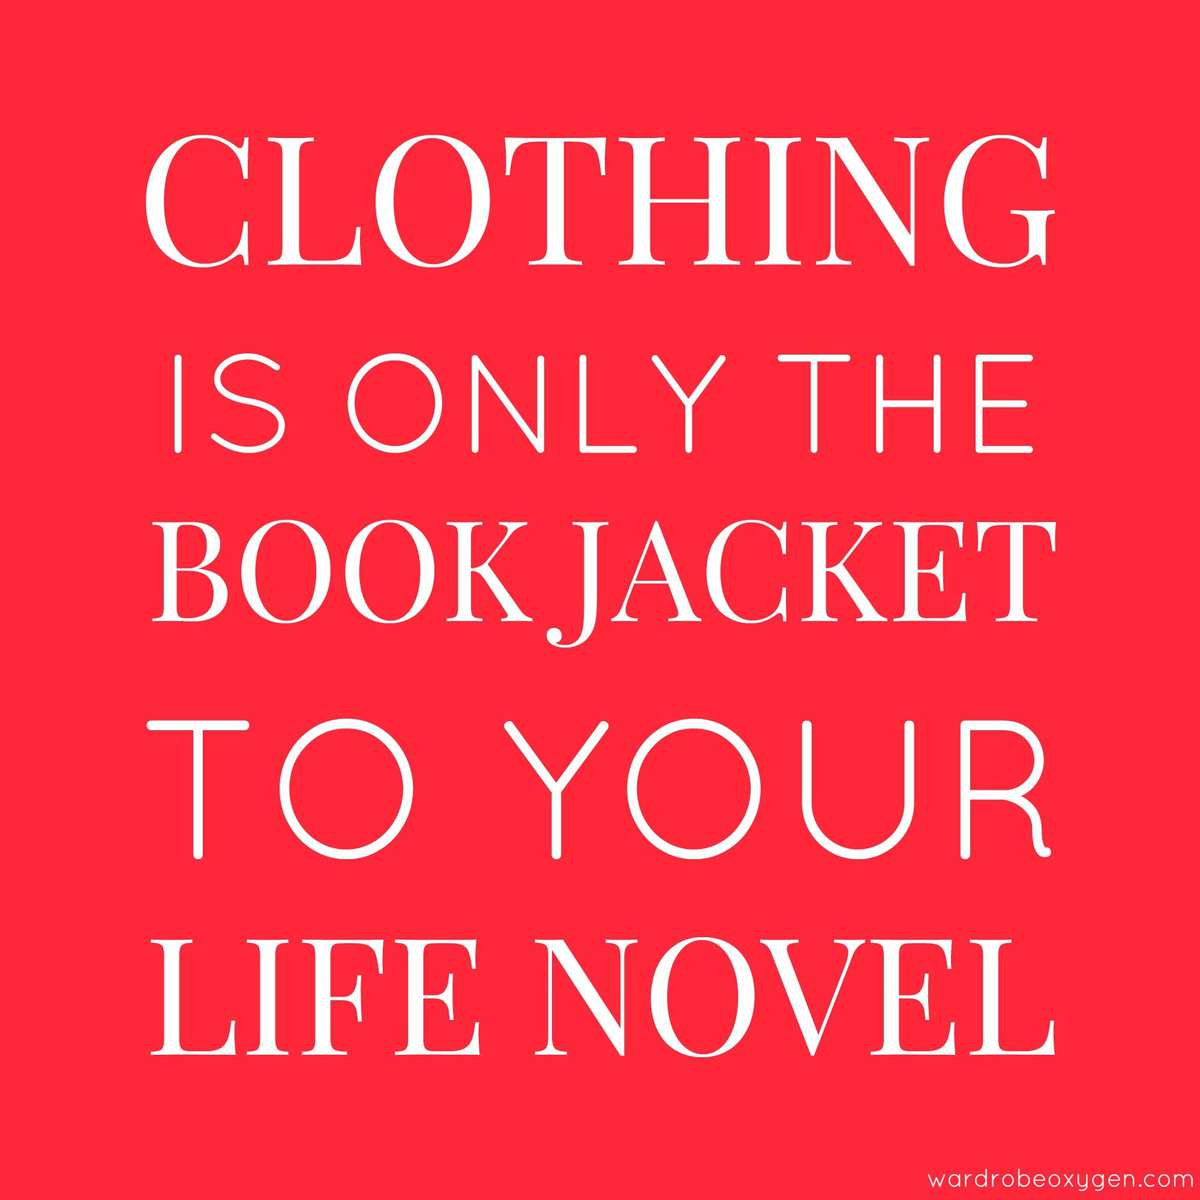 clothing is only the book jacket to your life novel